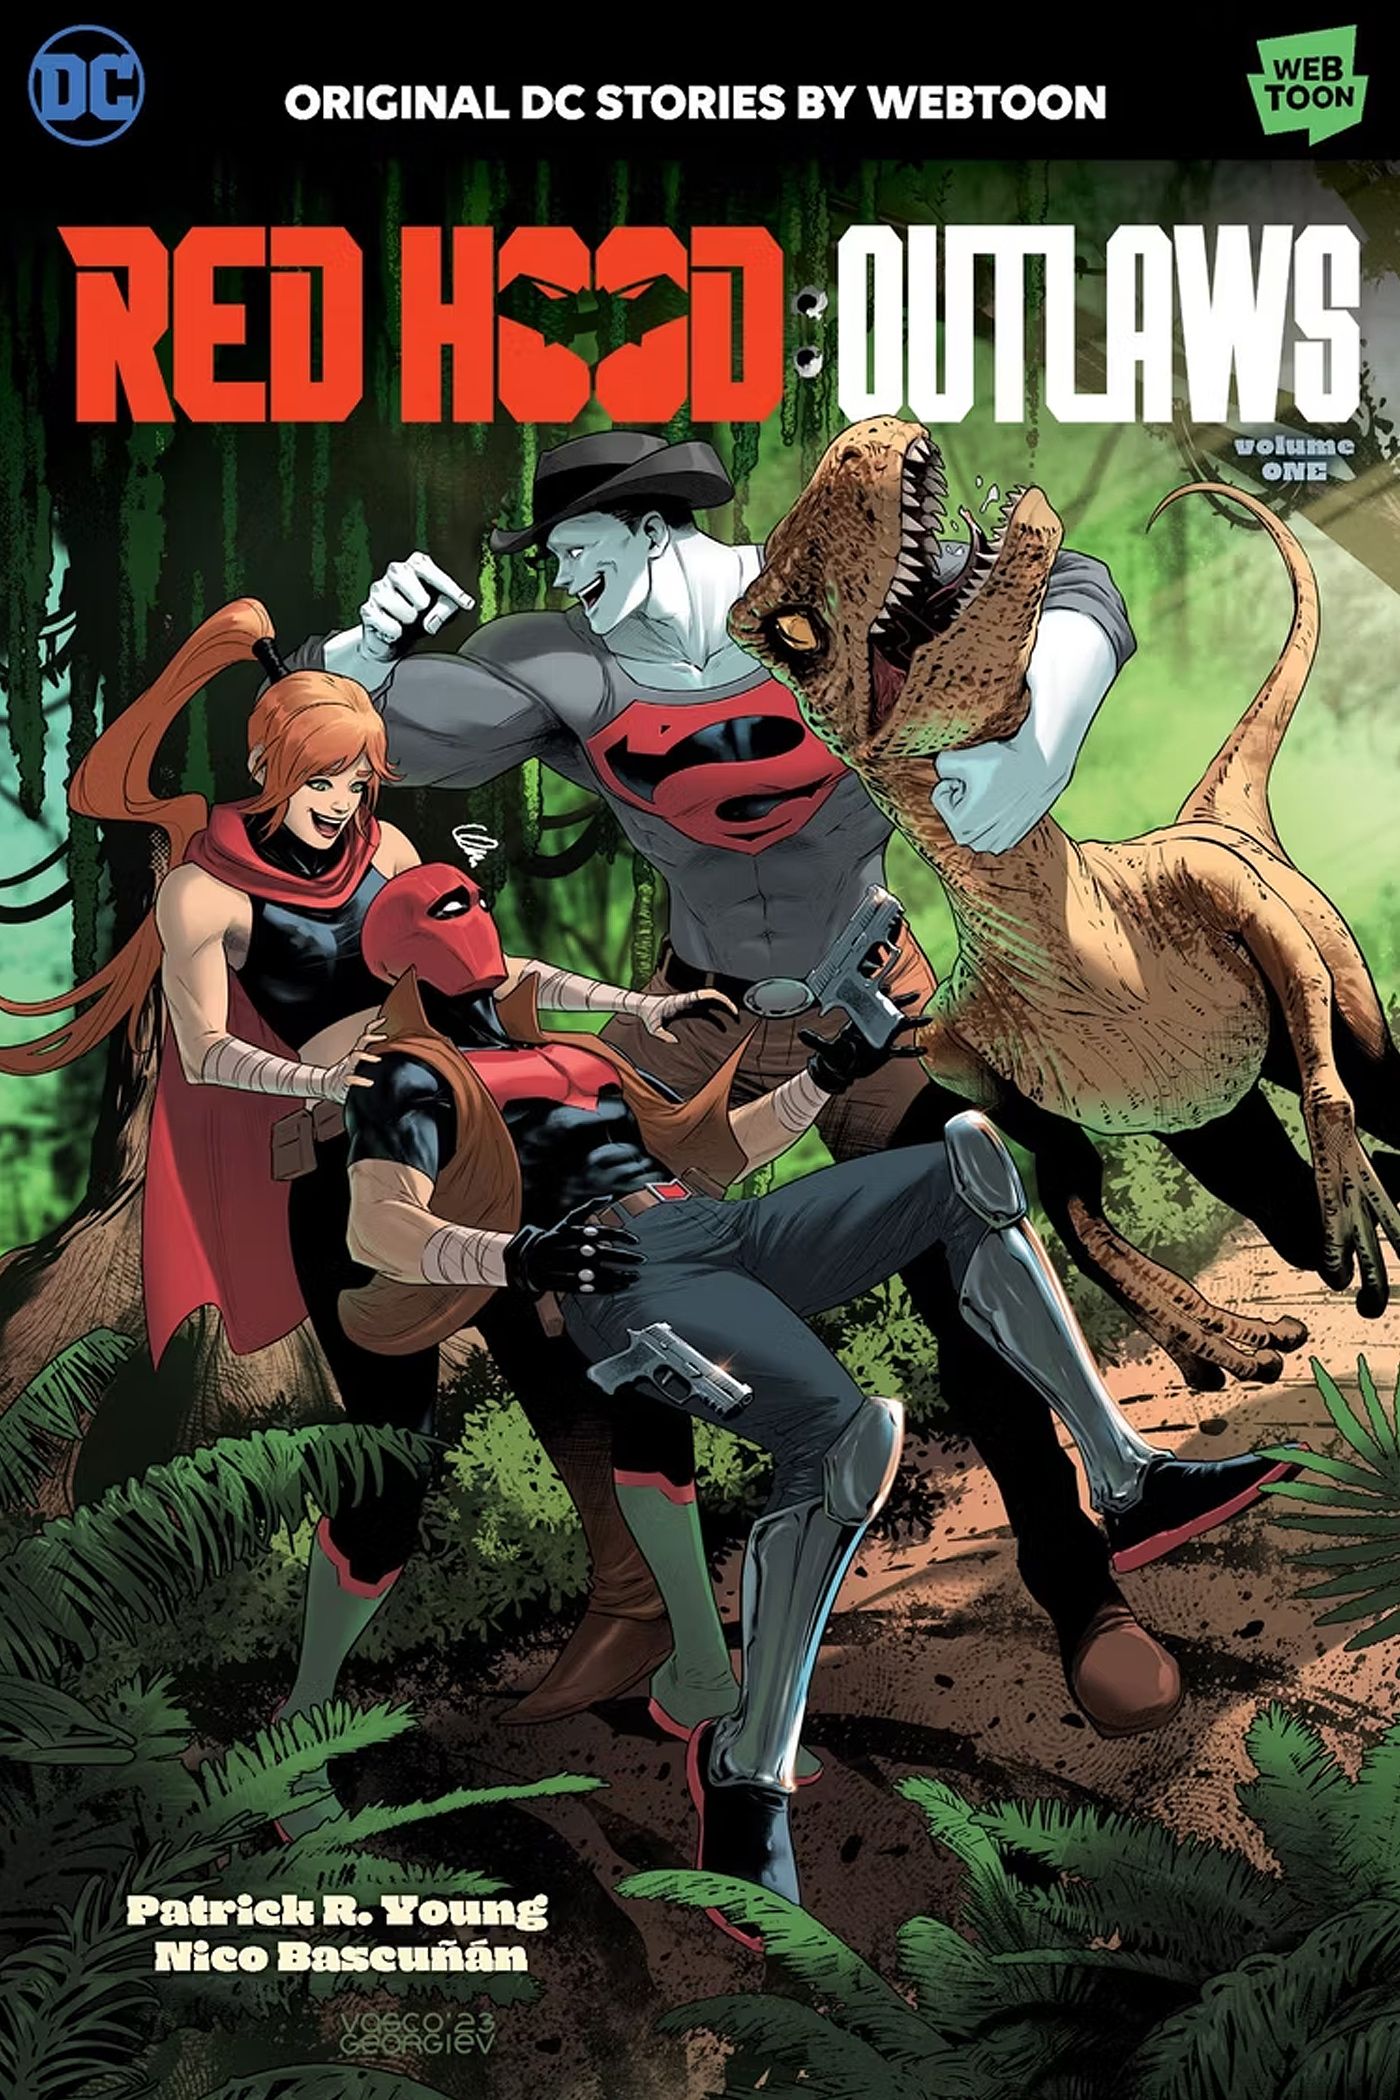 The Outlaws fight dinosaurs in Red Hood: Outlaws